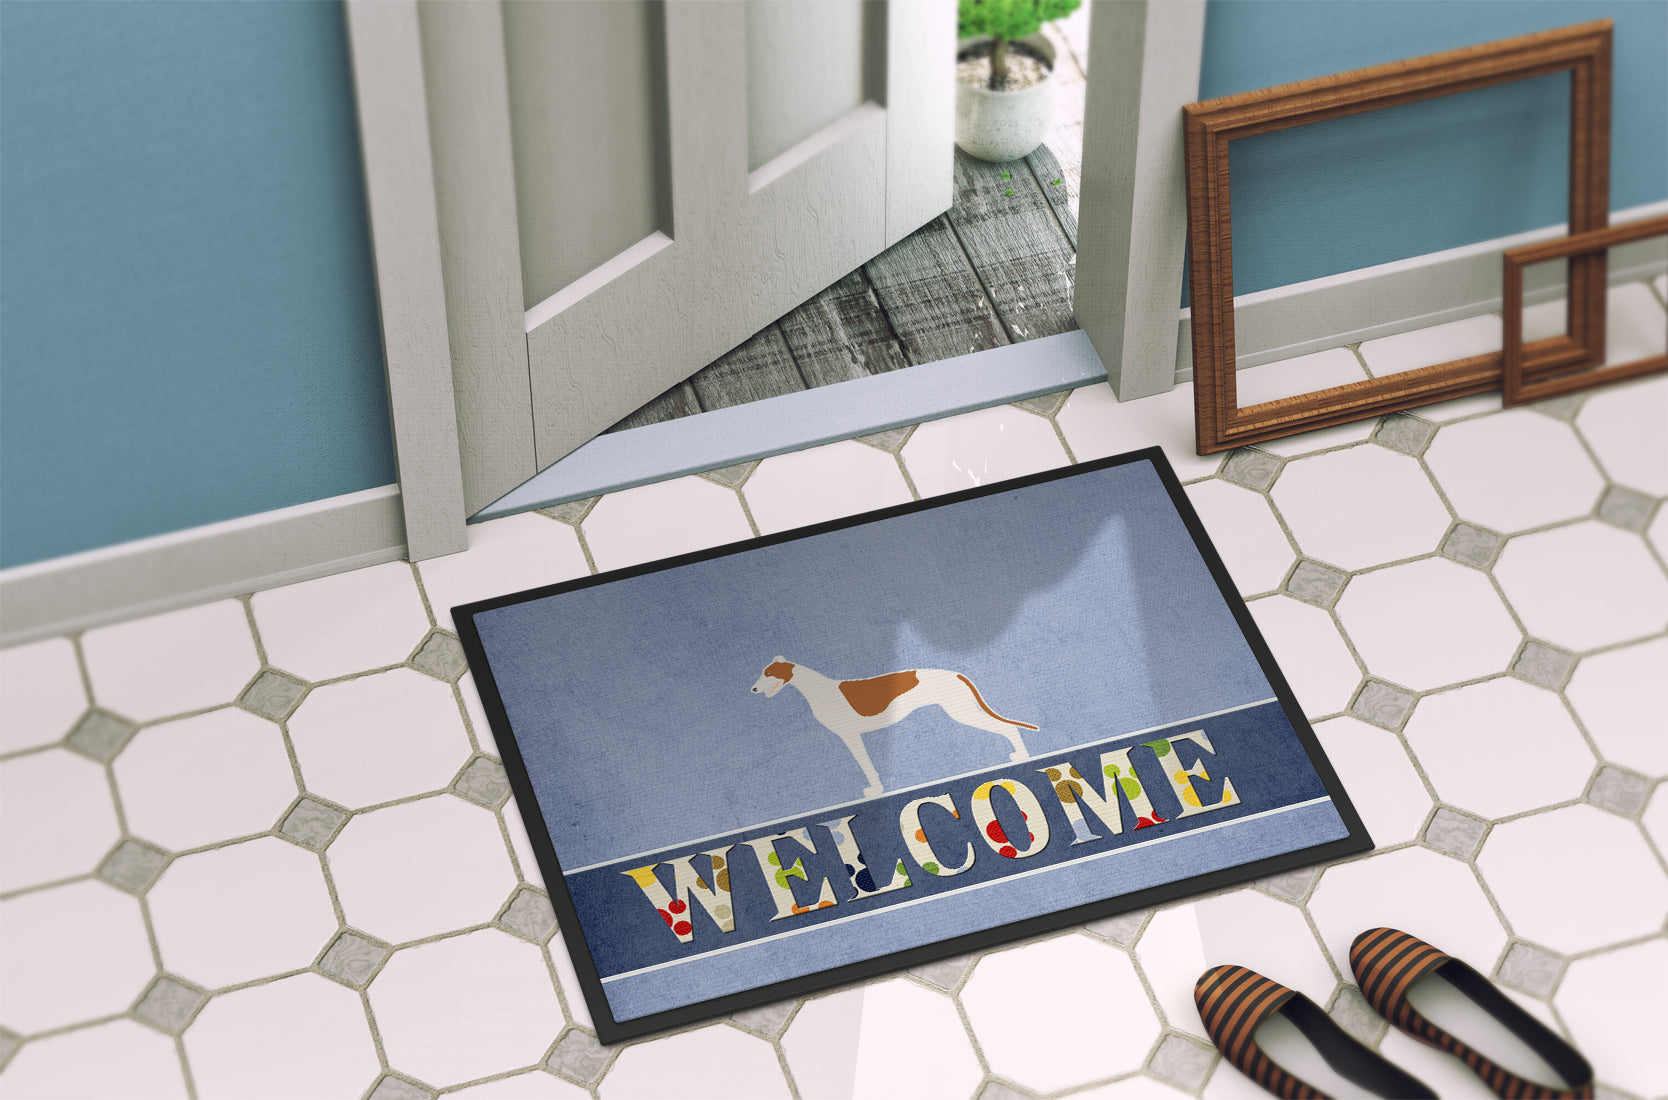 Greyhound Welcome Indoor or Outdoor Mat 18x27 BB5509MAT - the-store.com